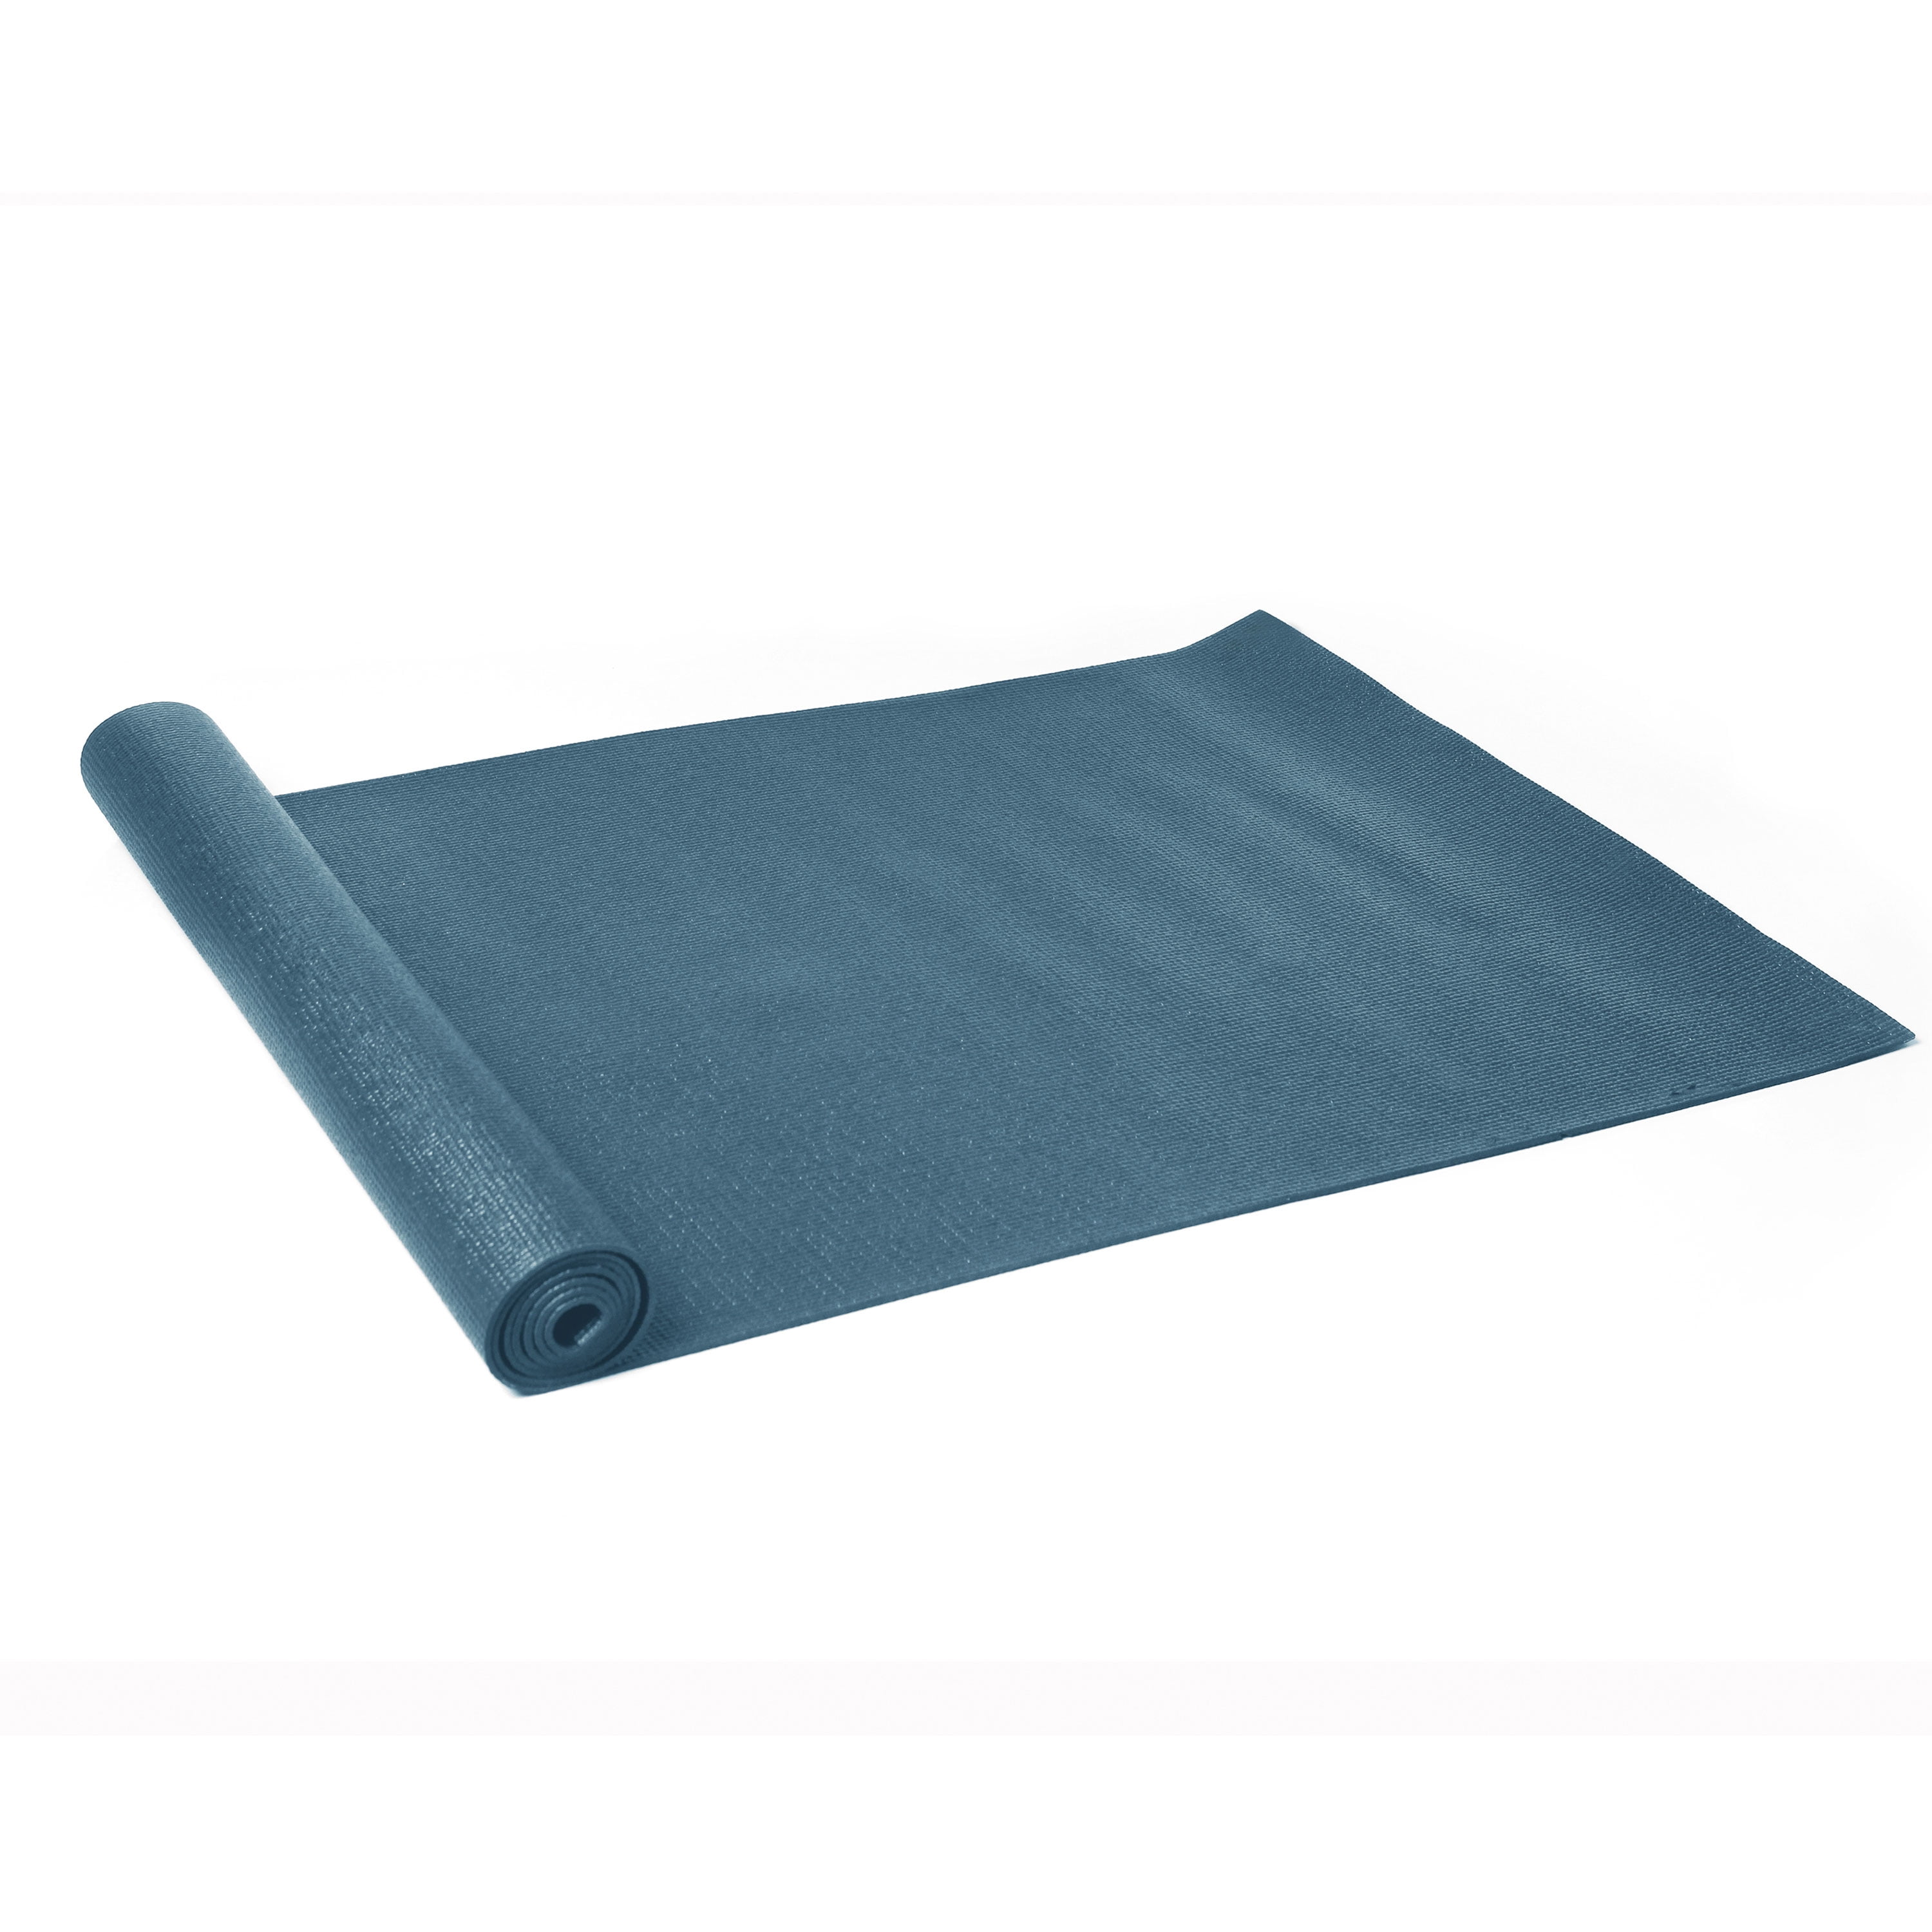 Athletic Works PVC Yoga Mat, 3mm, Real Teal, 68inx24in, Non Slip